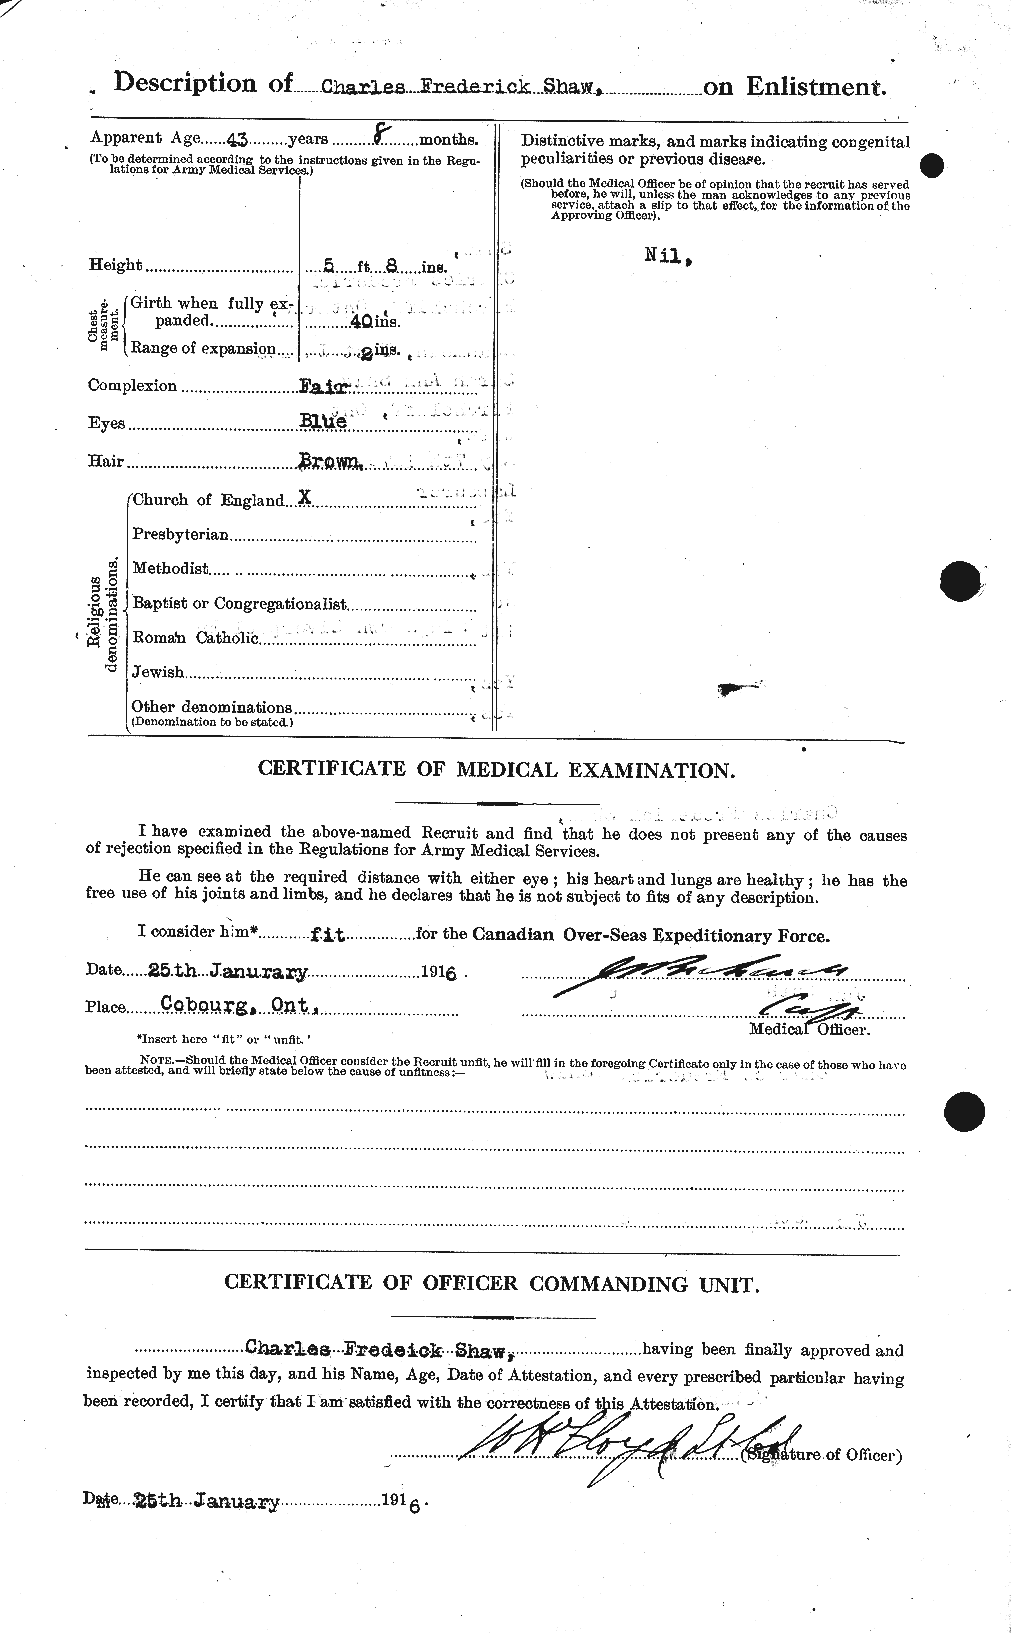 Personnel Records of the First World War - CEF 092979b